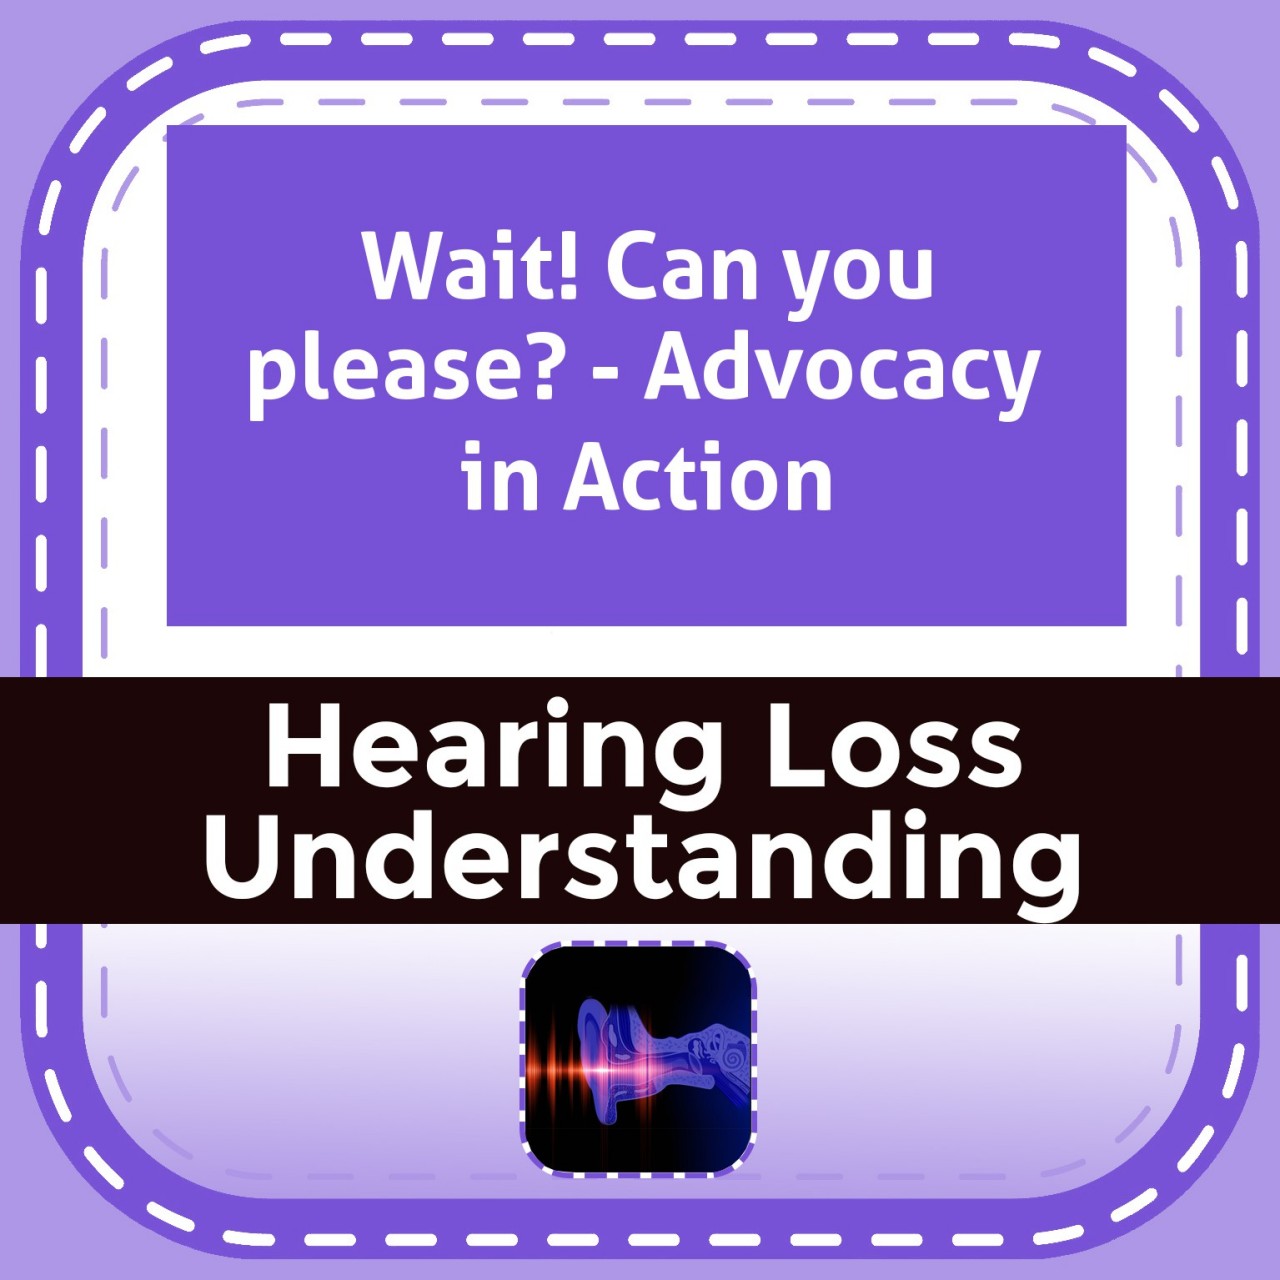 Wait! Can you please? - Advocacy in Action